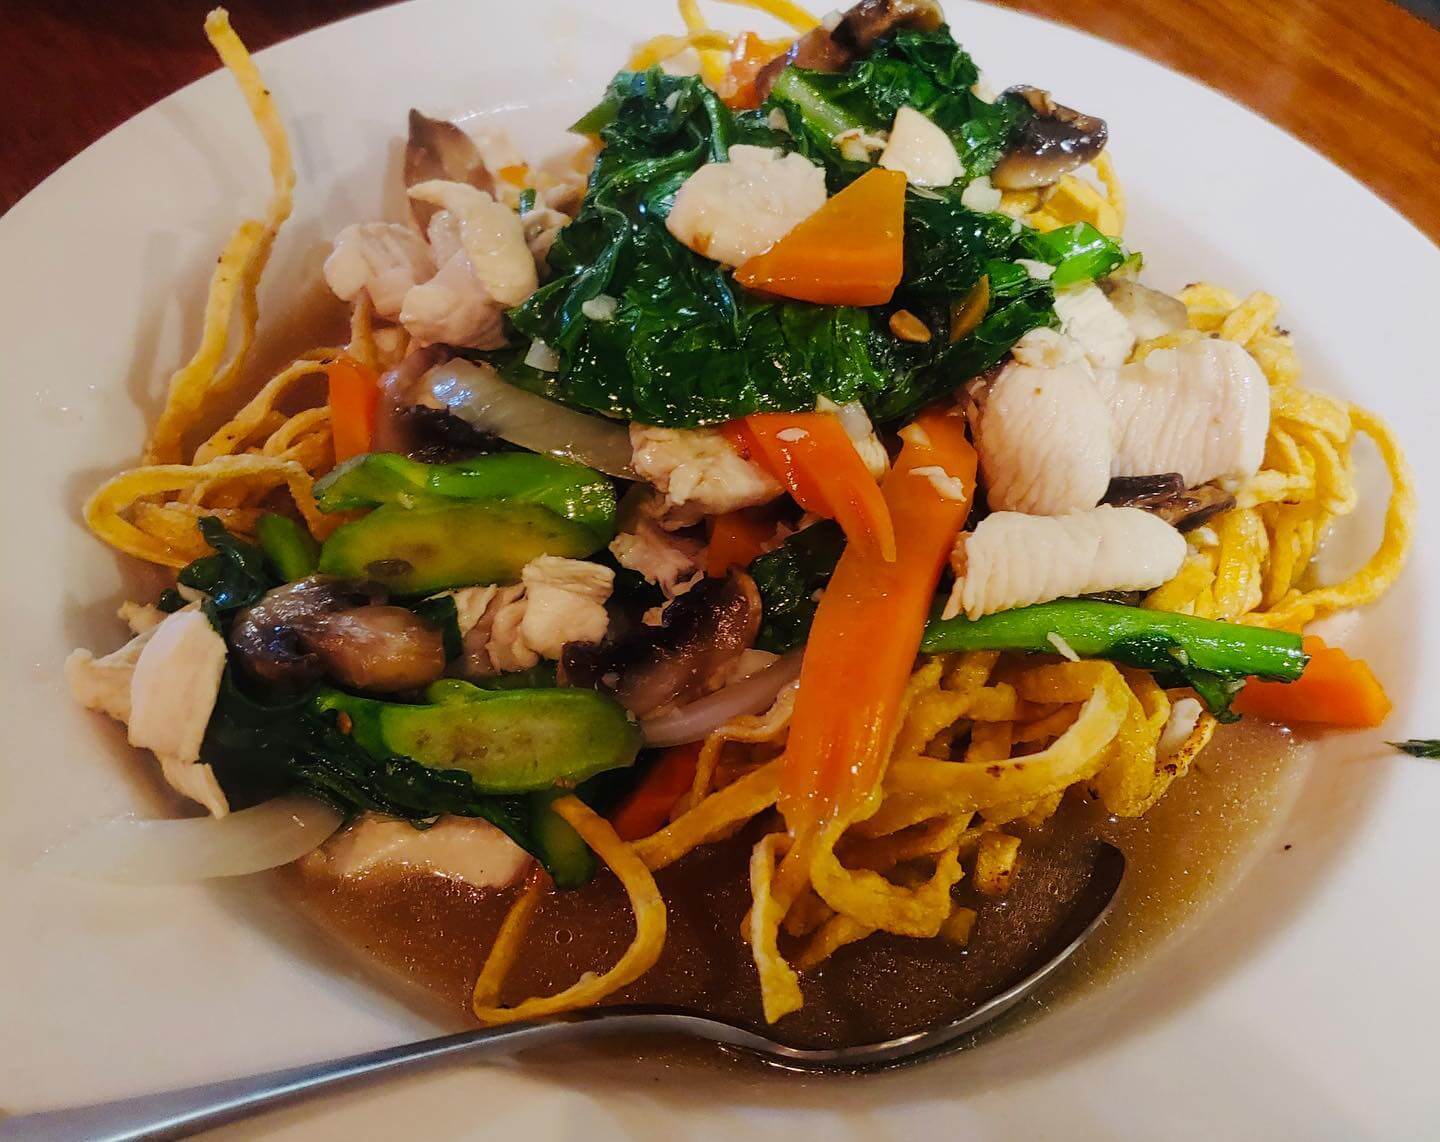 Mee krob from Indochine downtown Jacksonville